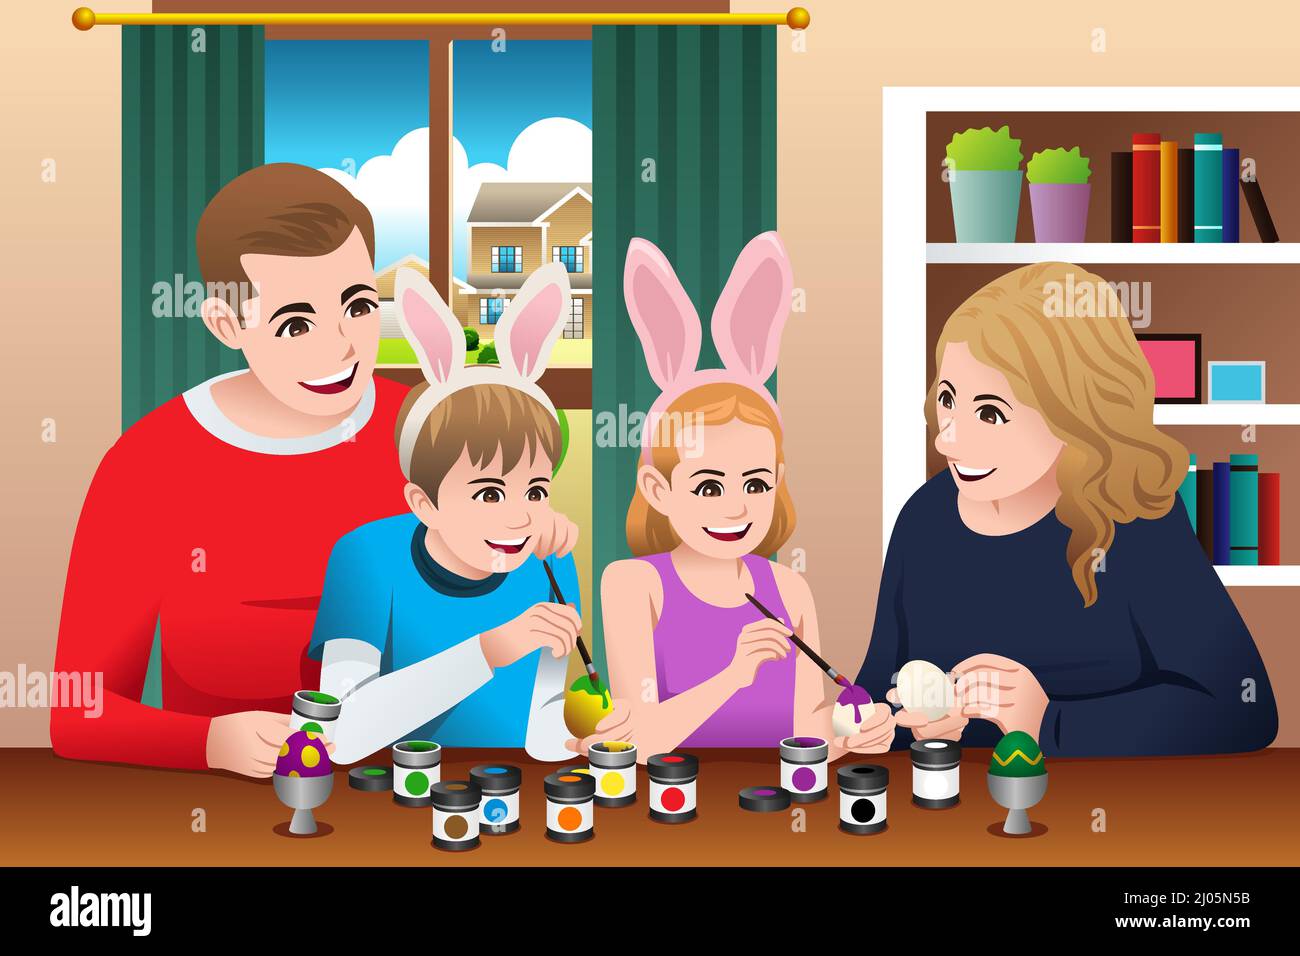 A vector illustration of Happy Family Celebrating Easter Painting Easter Egg Stock Vector